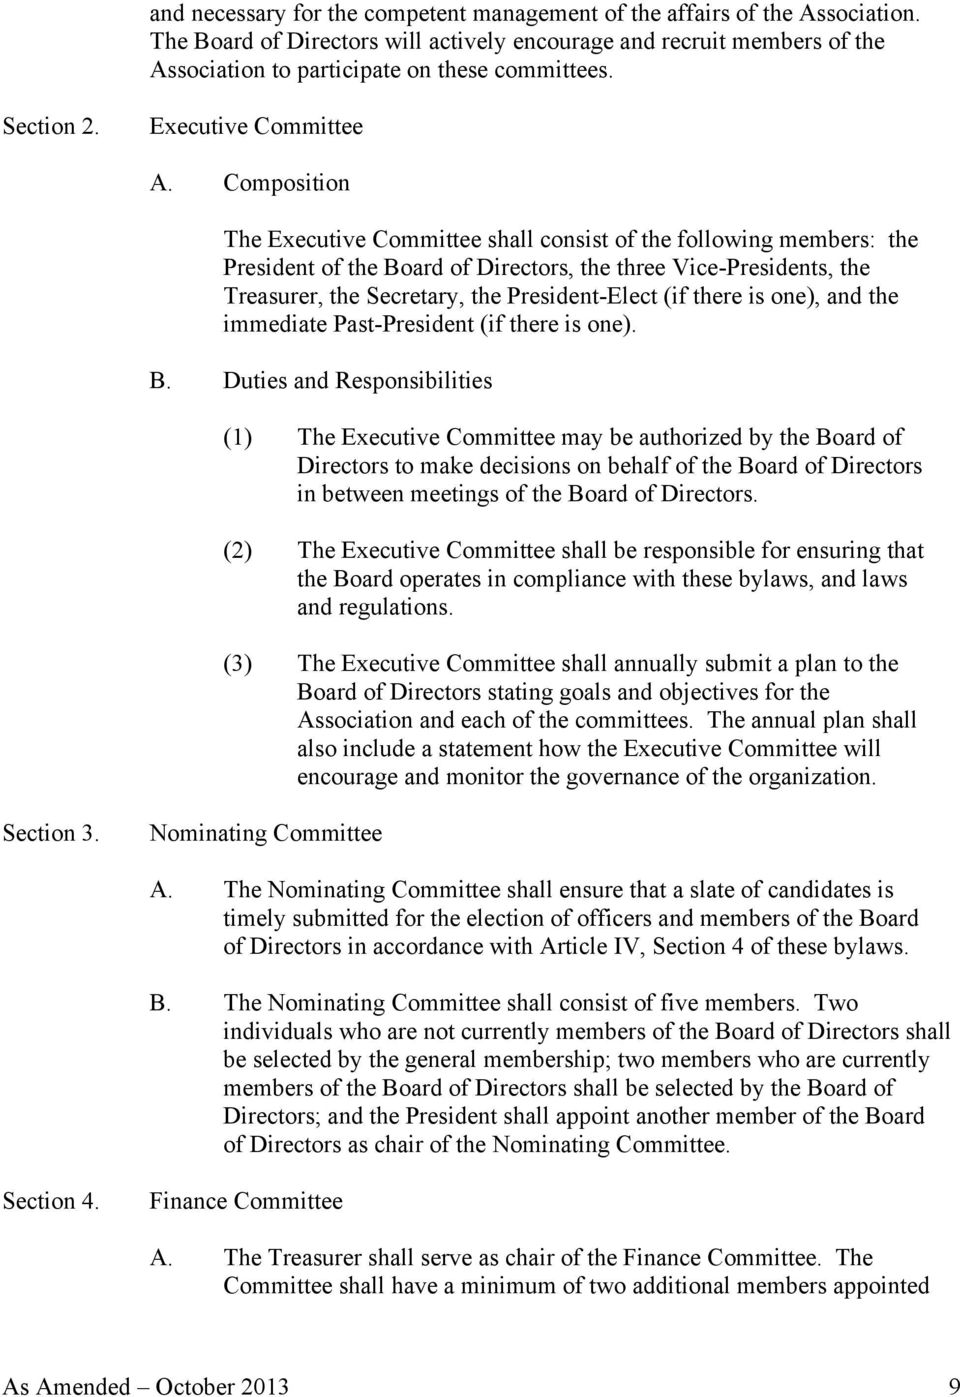 Composition The Executive Committee shall consist of the following members: the President of the Board of Directors, the three Vice-Presidents, the Treasurer, the Secretary, the President-Elect (if